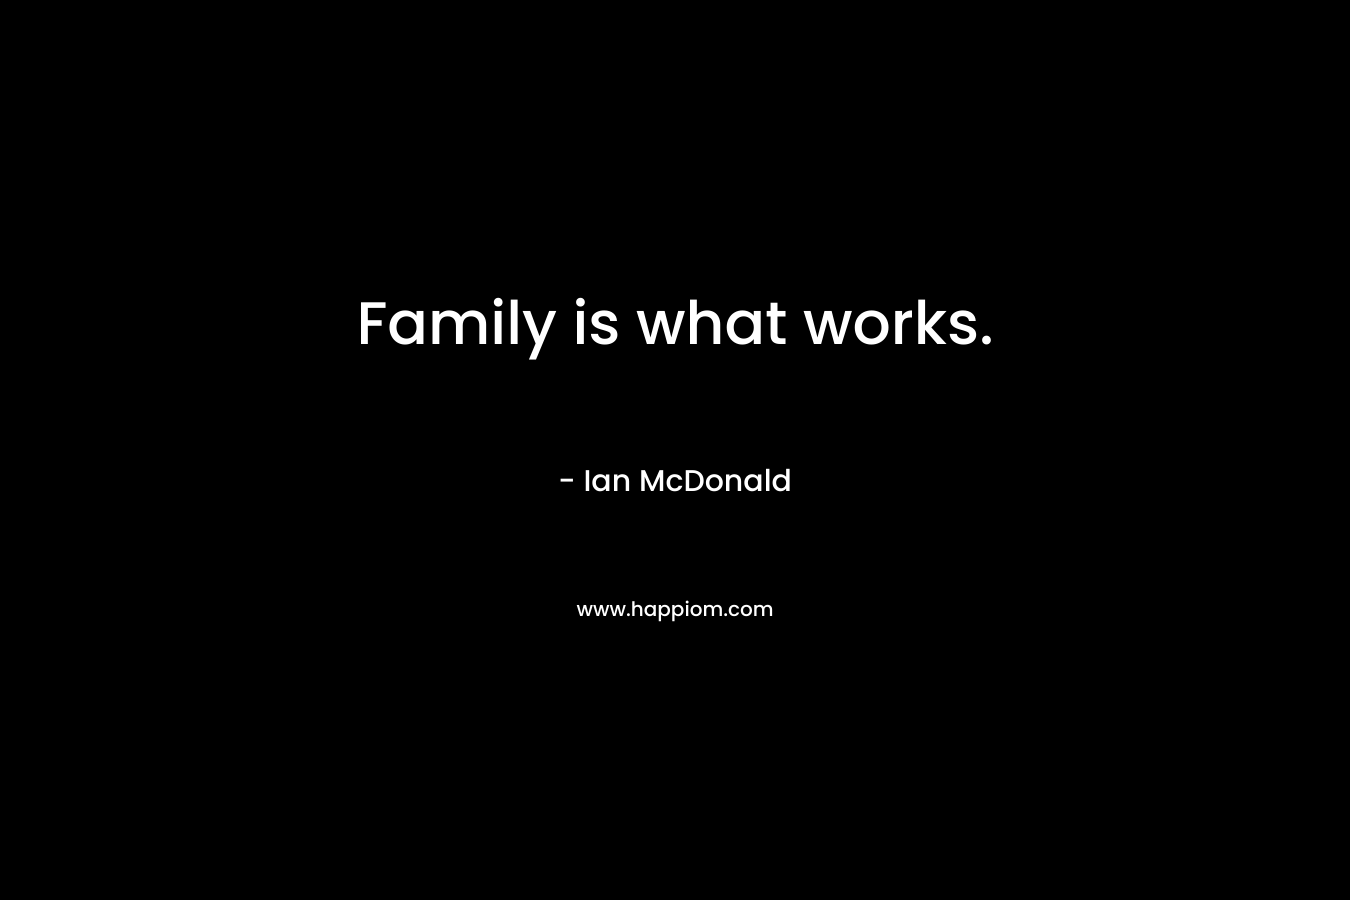 Family is what works.